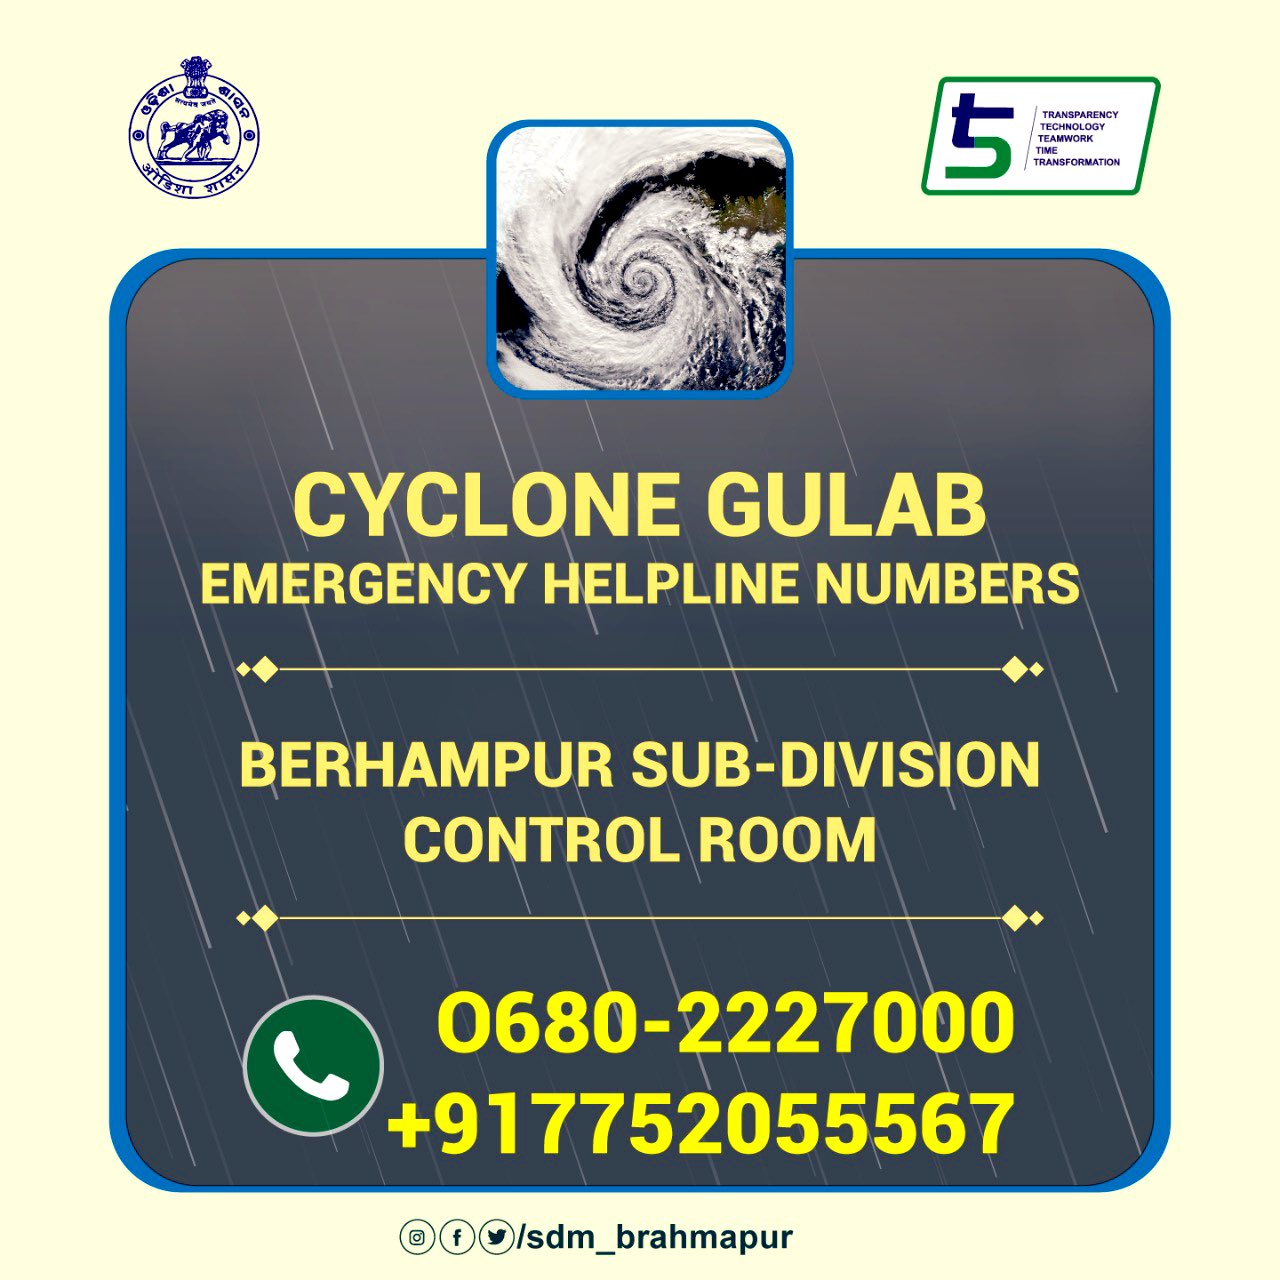 ganjam district administration issued Emergency helpline number for possible cyclone